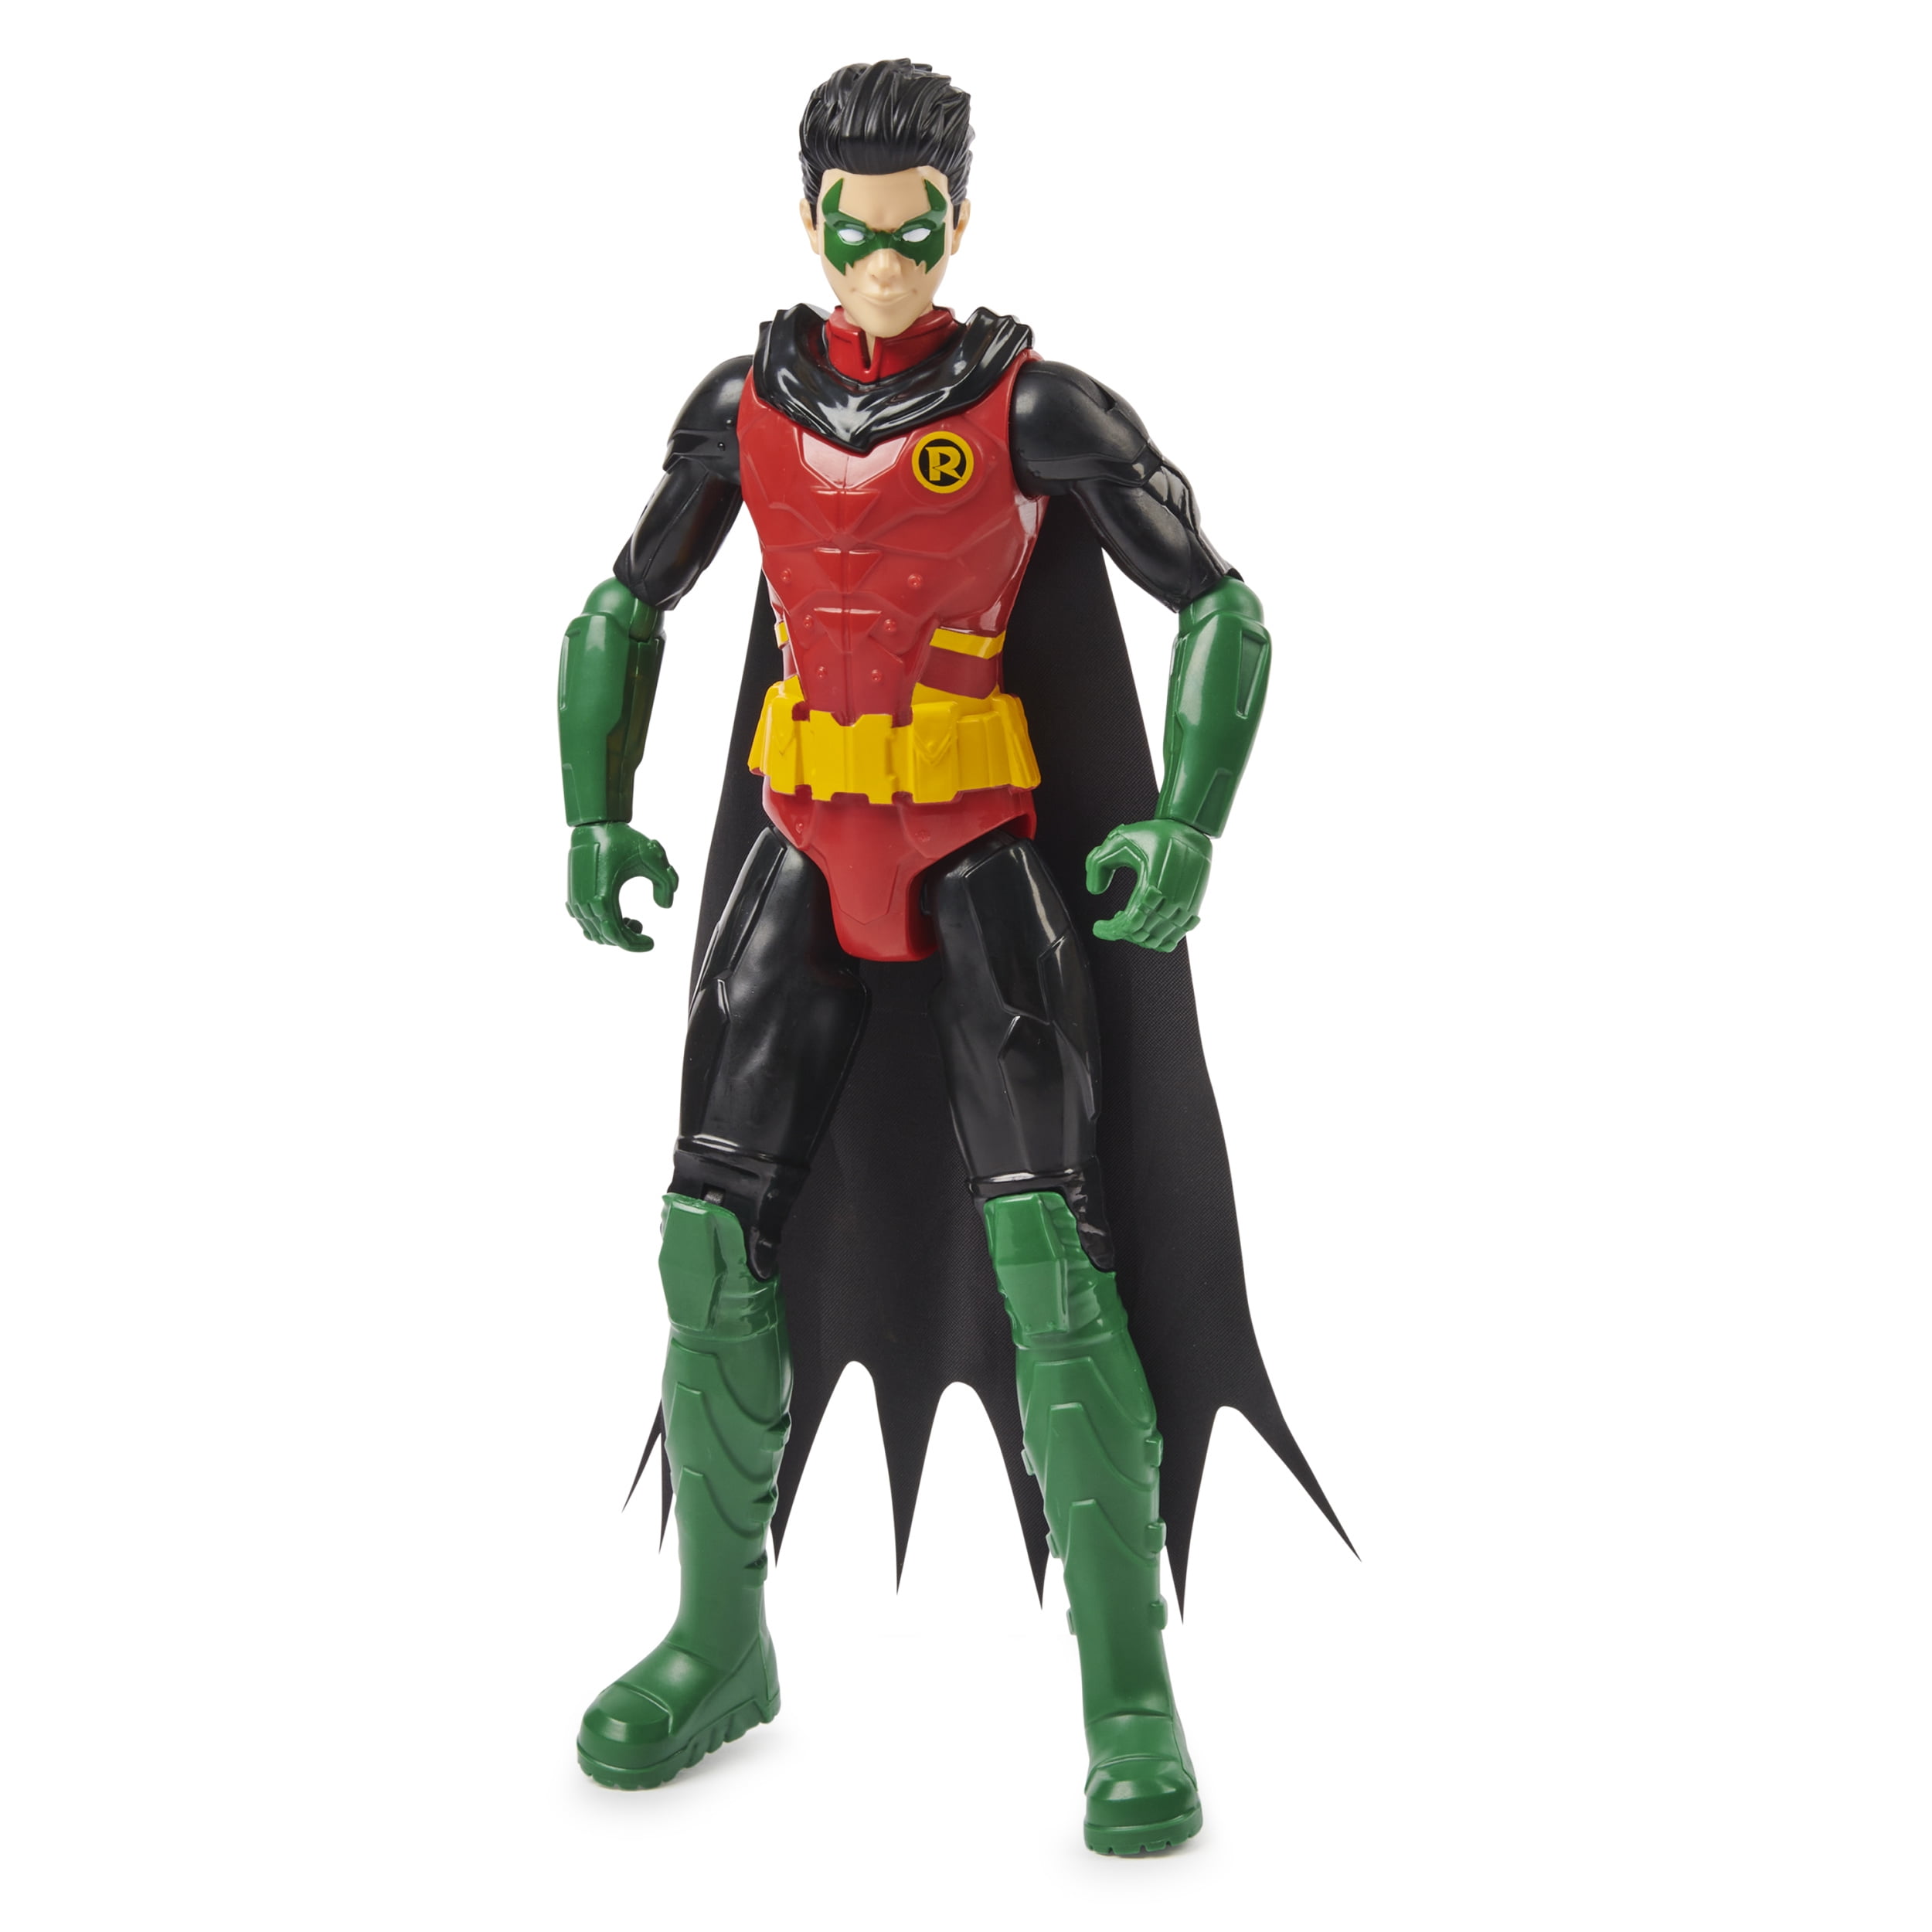 Batman 12-inch Robin Action Figure, for Kids Aged 3 and up